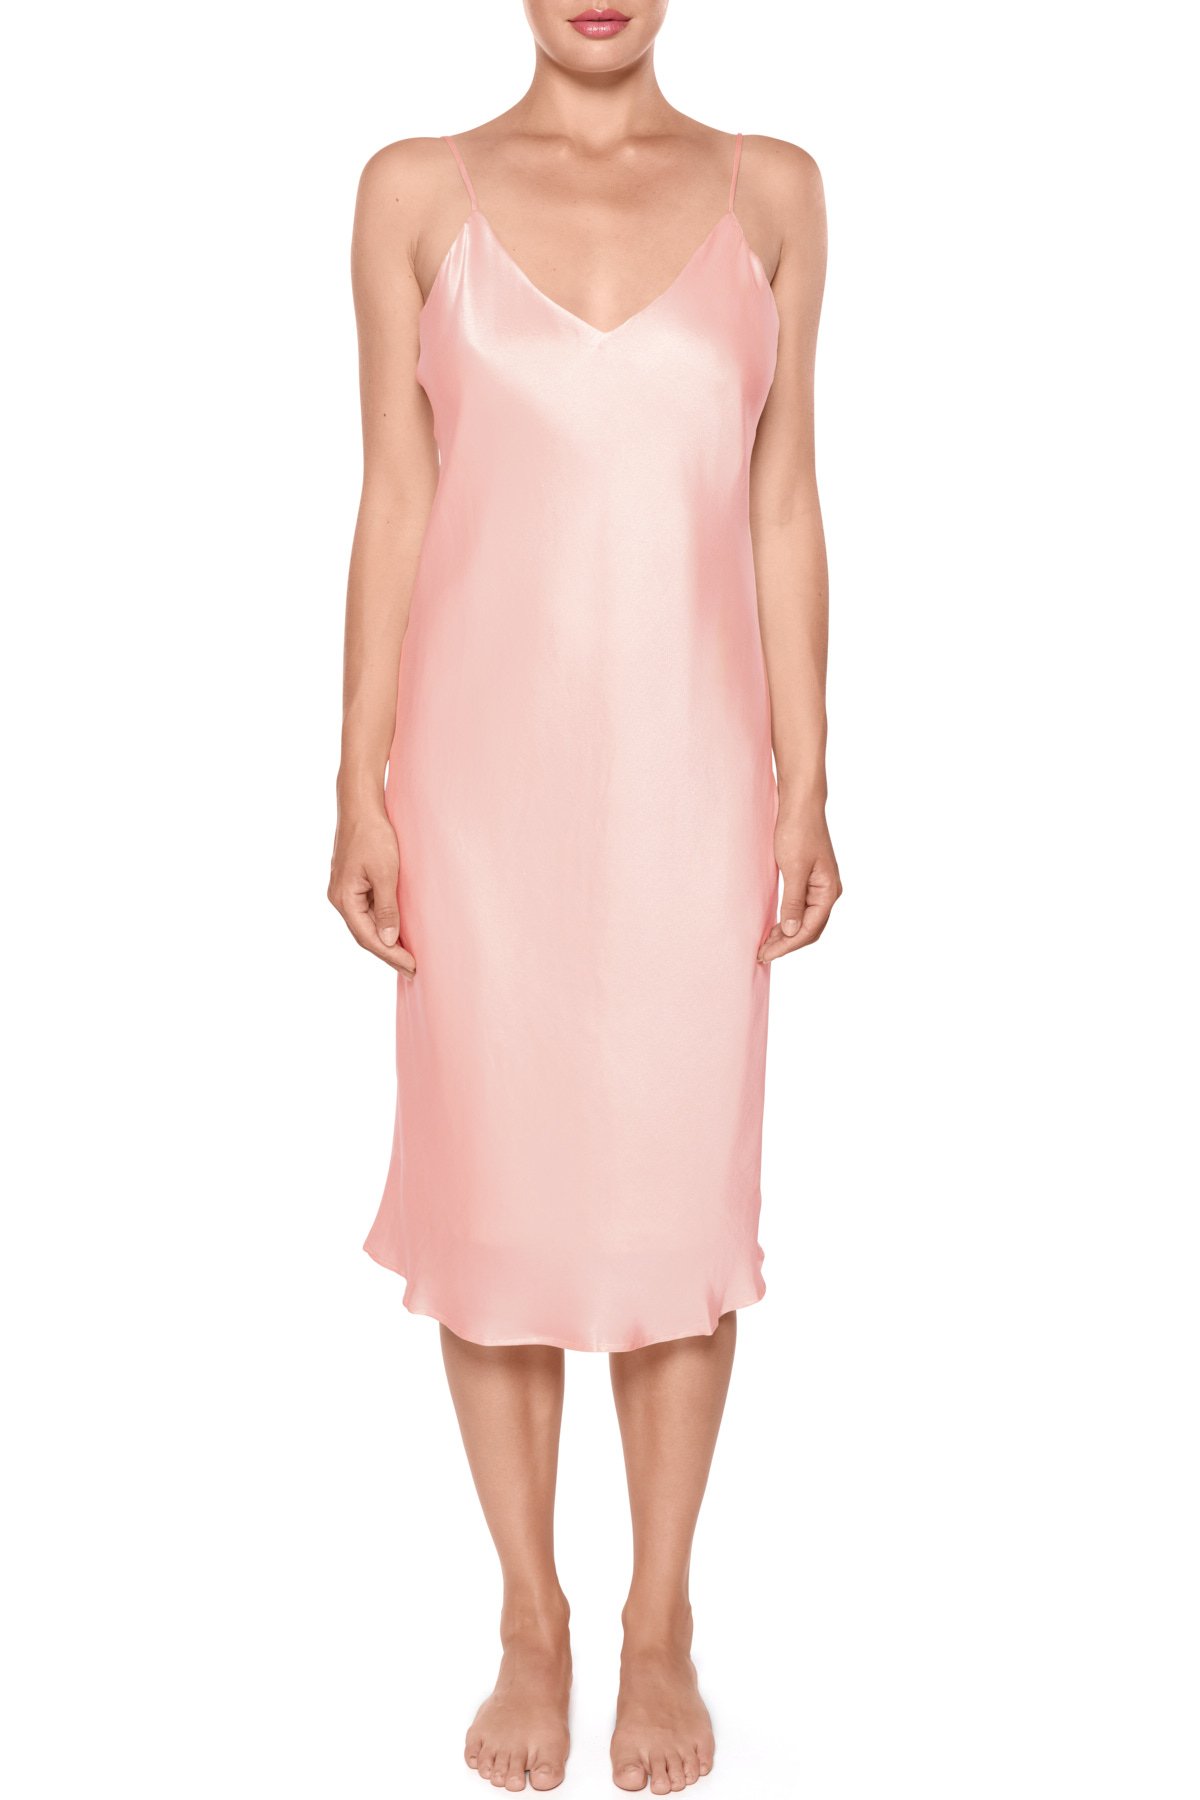 Light pink slip dress, Dress with feathers